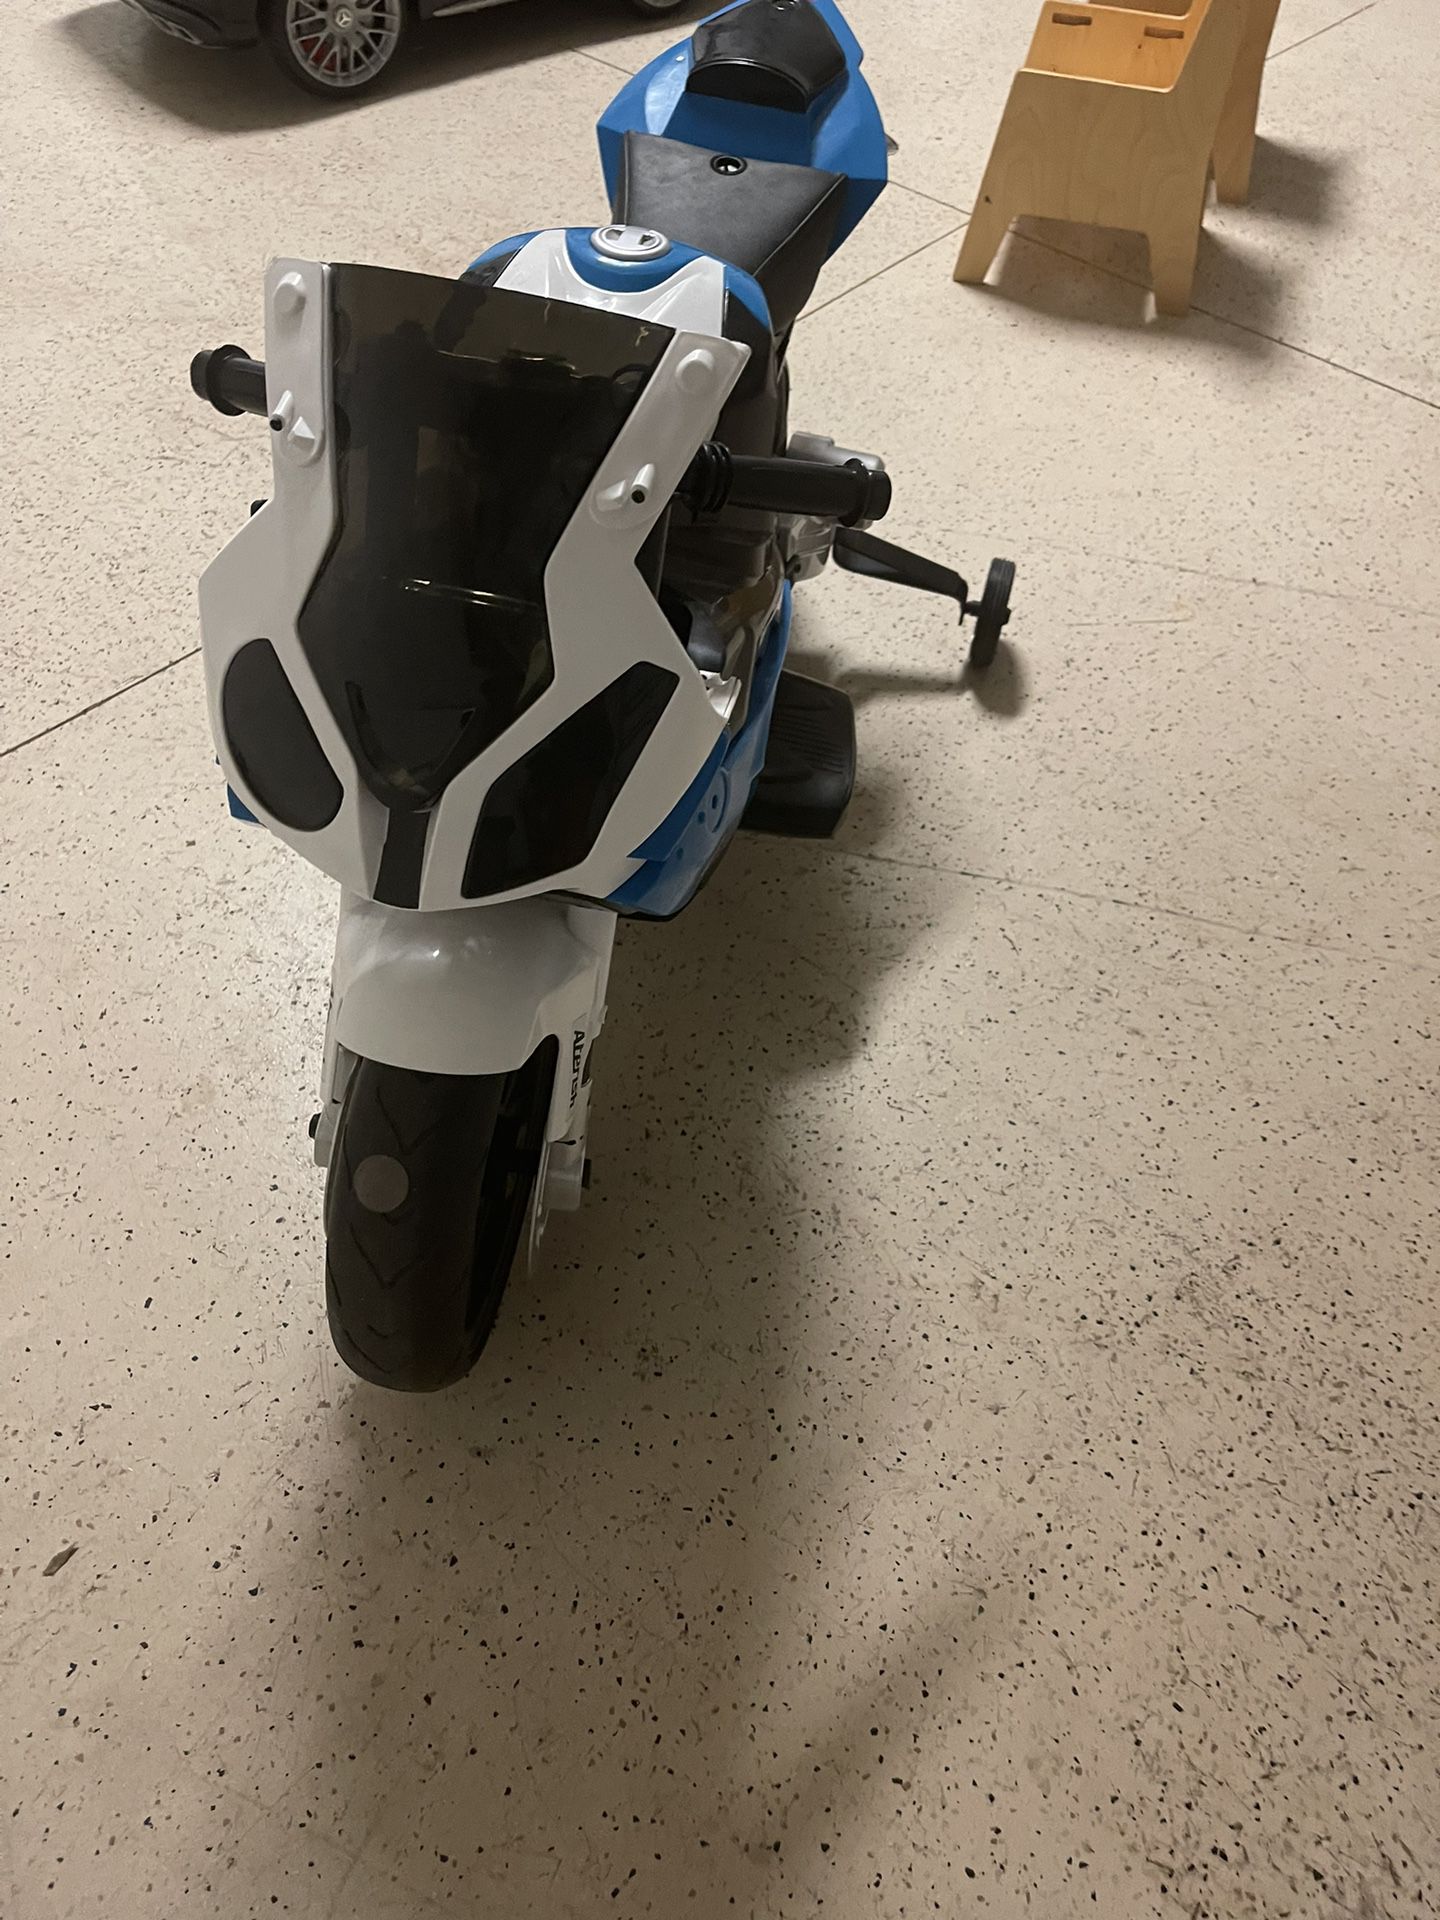 Electric Motorcycle For Kids $100